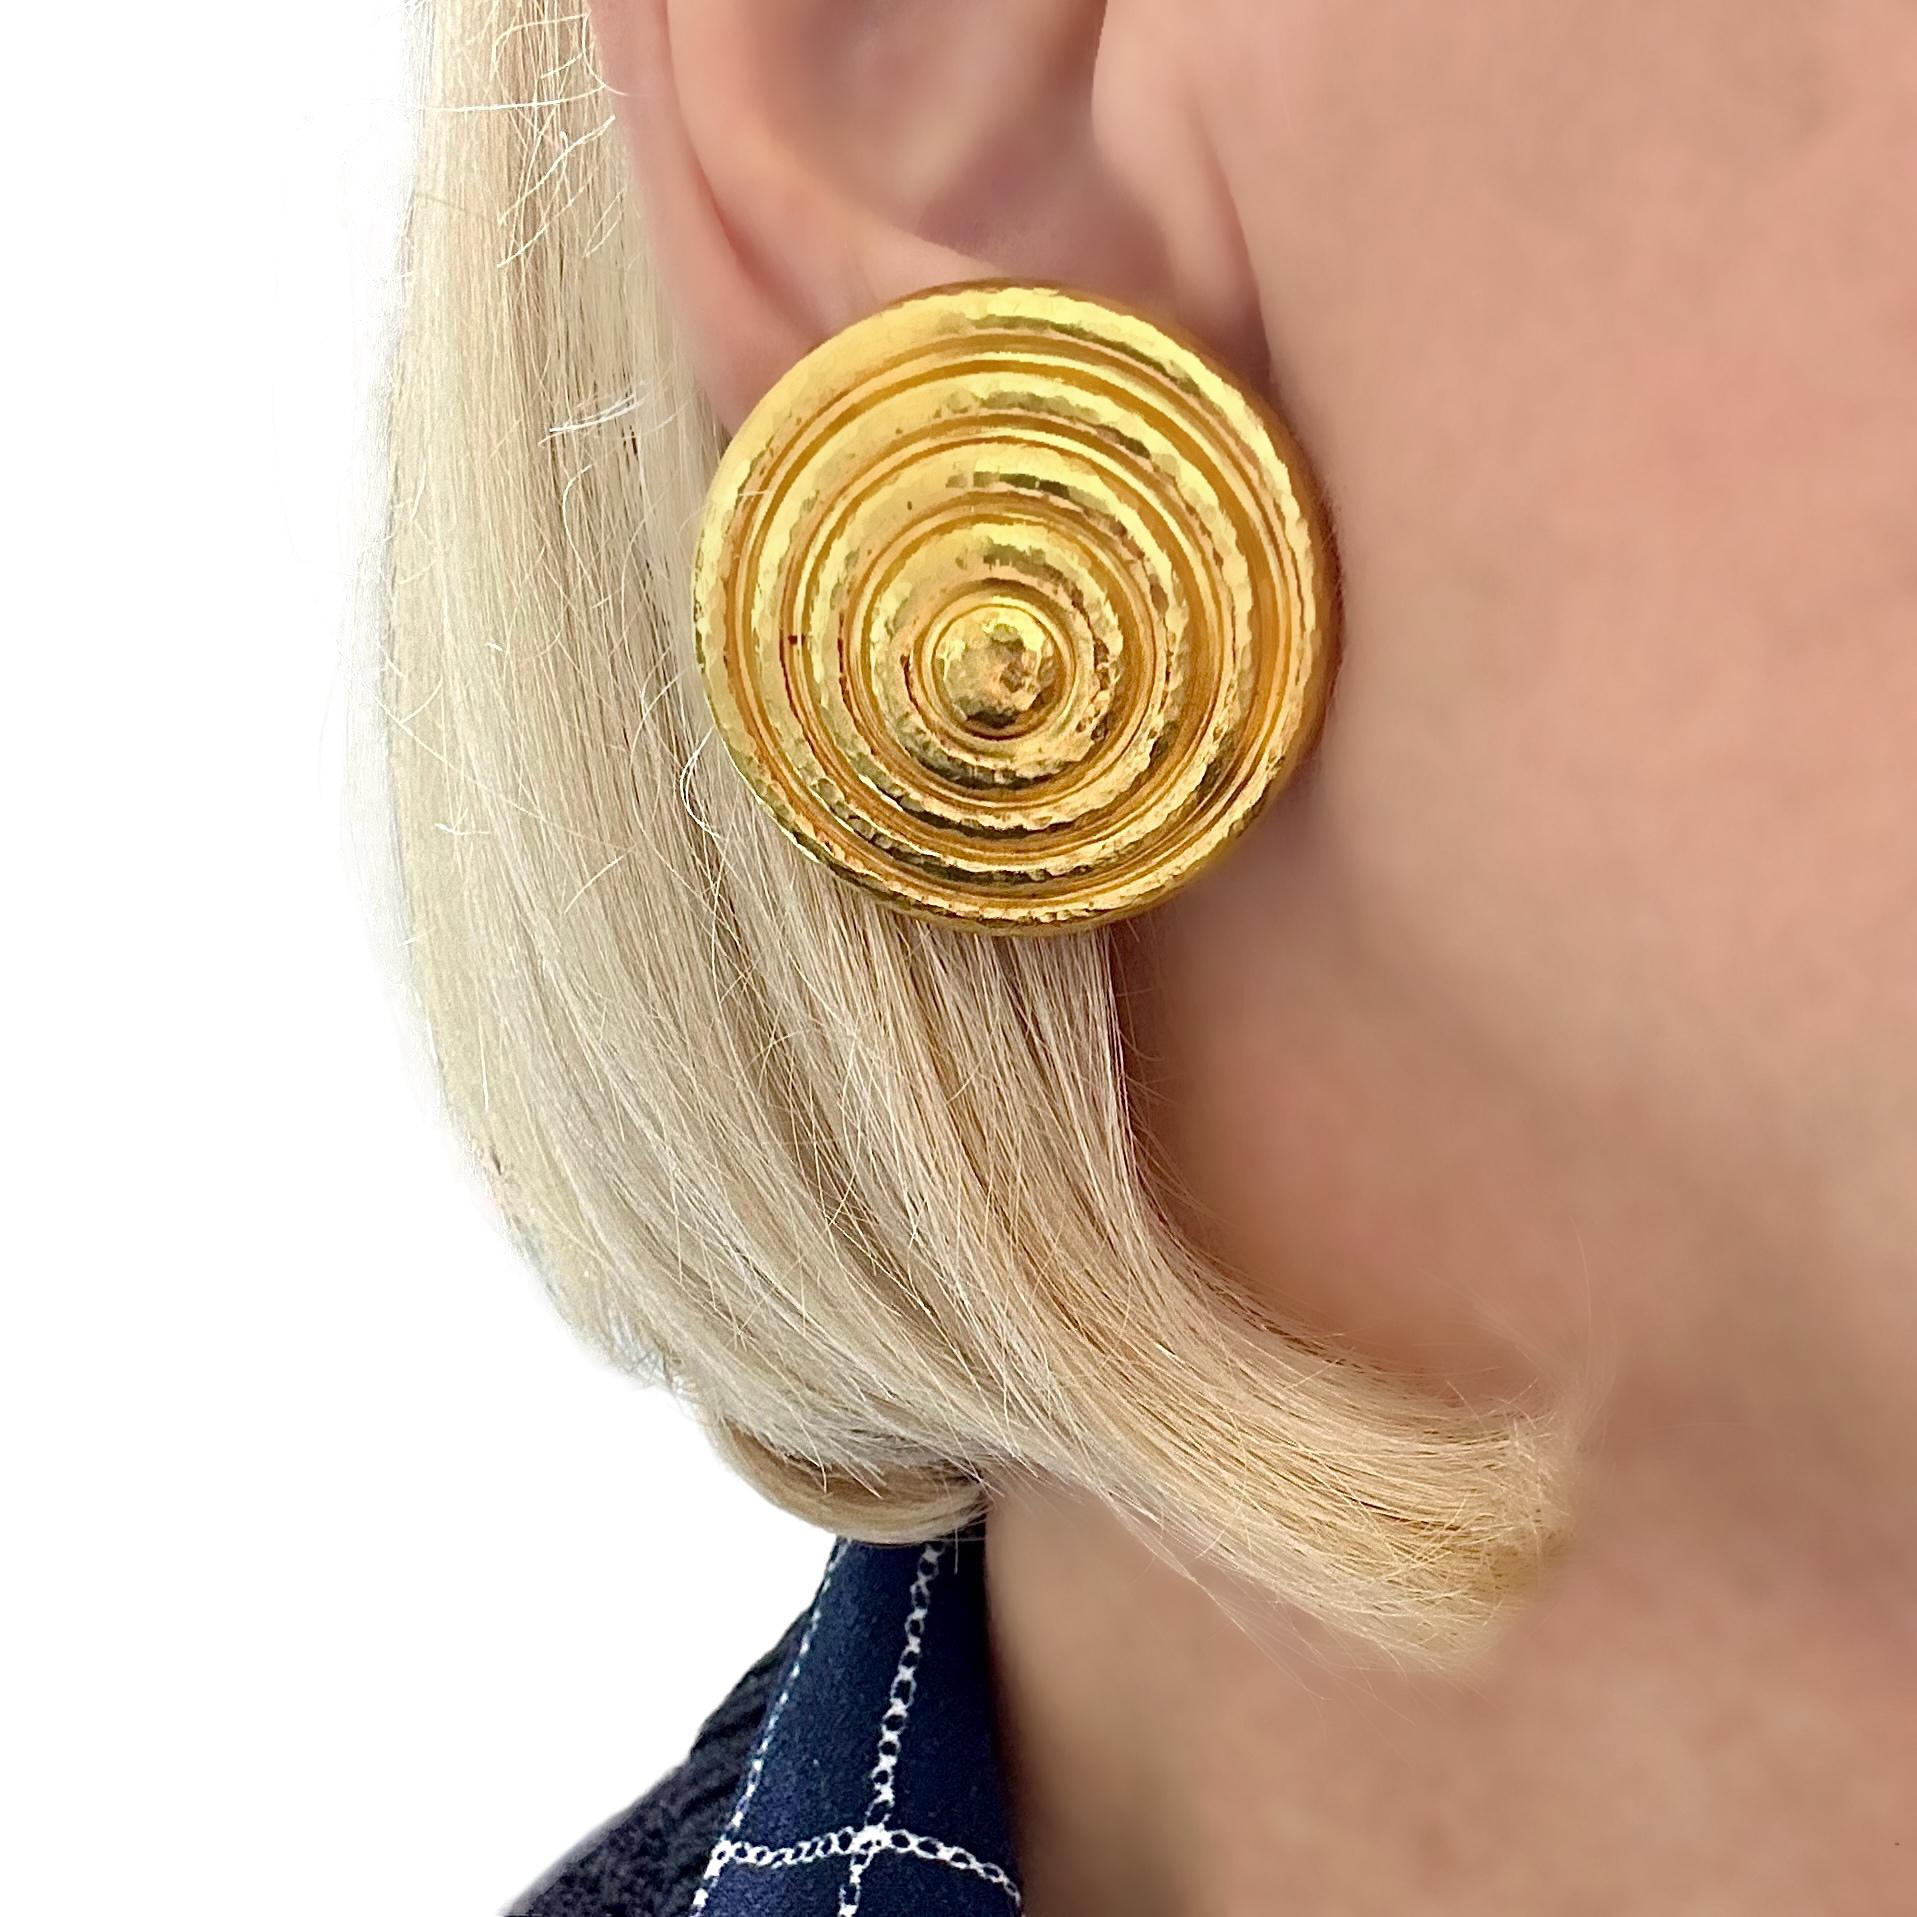 Large Lalaounis 18K Yellow Gold Concentric Circle Earrings 1.38 Inch Diameter  For Sale 5